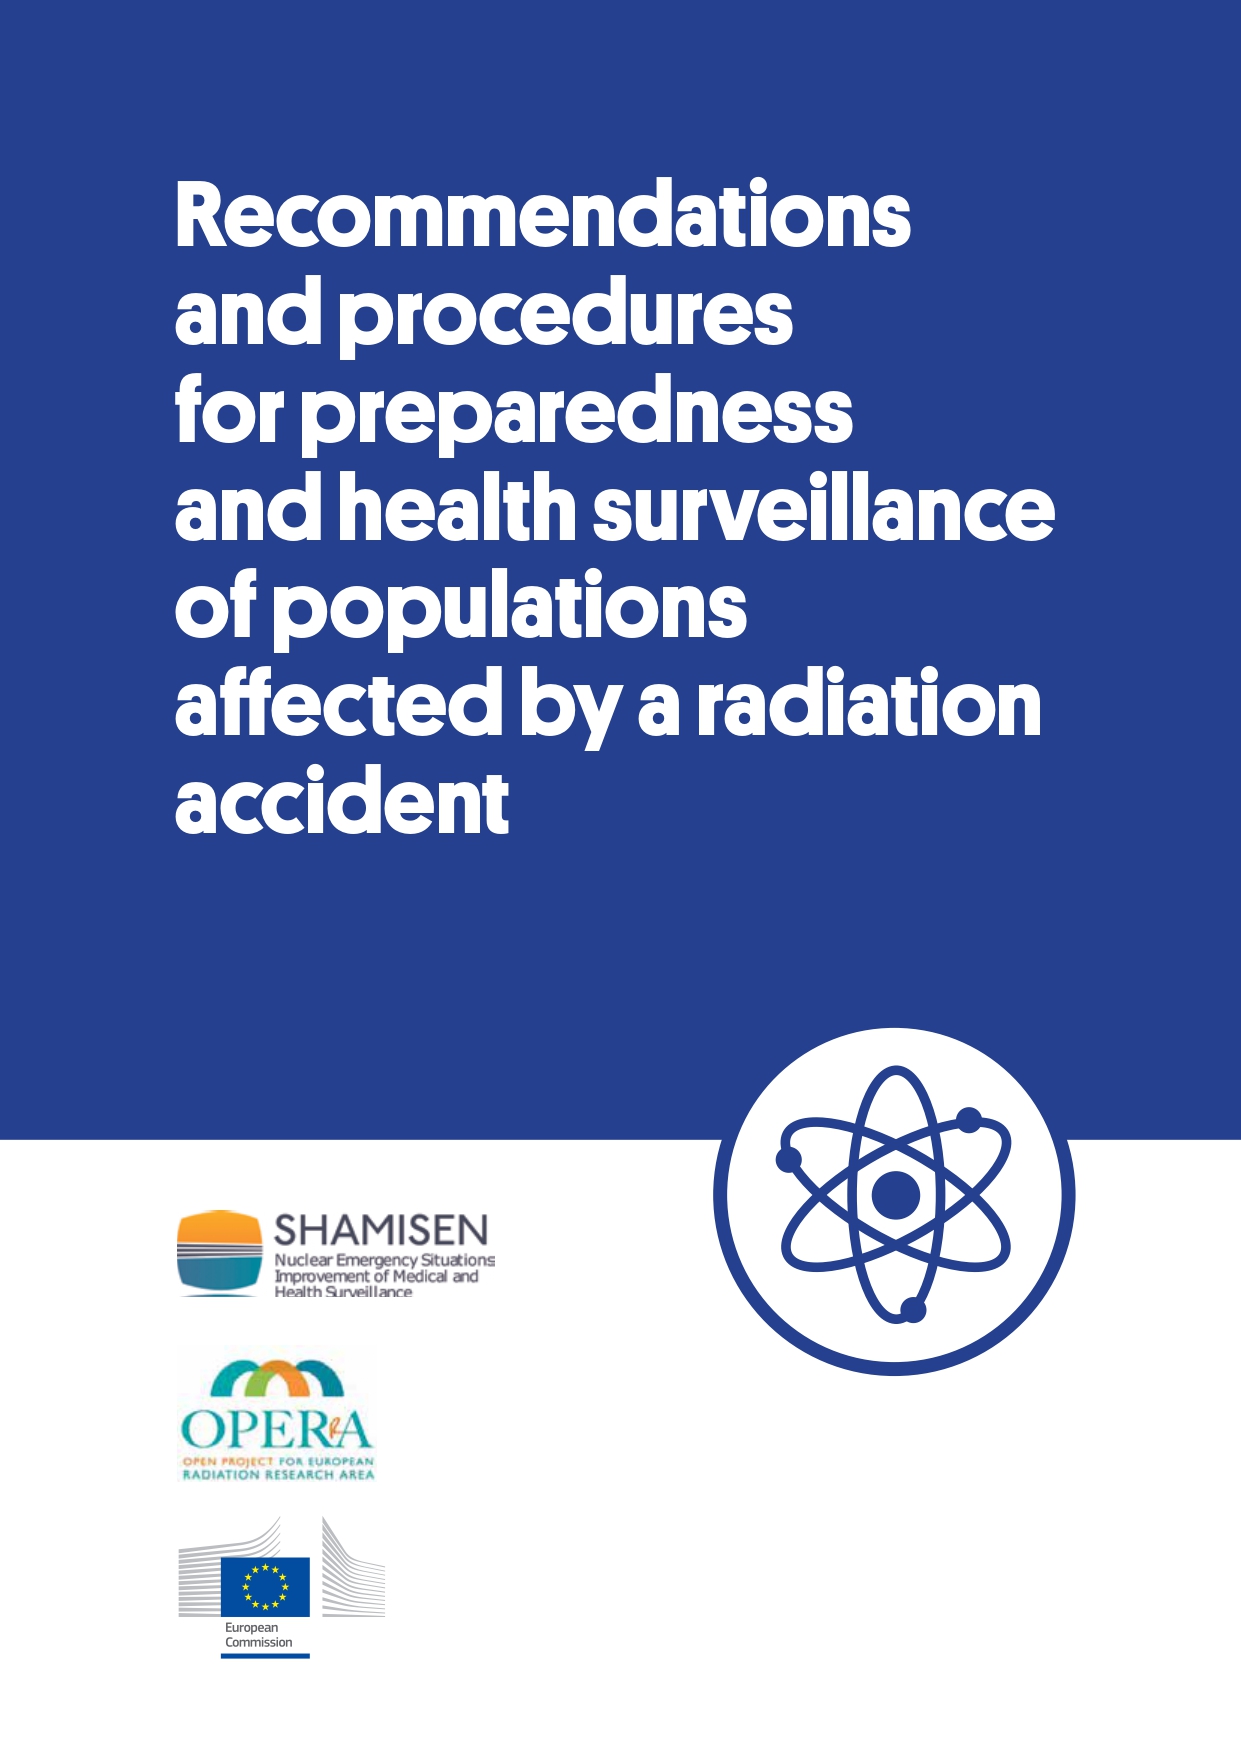 Recommendations and procedures for preparedness and health surveillance of populations affected by a radiation accident